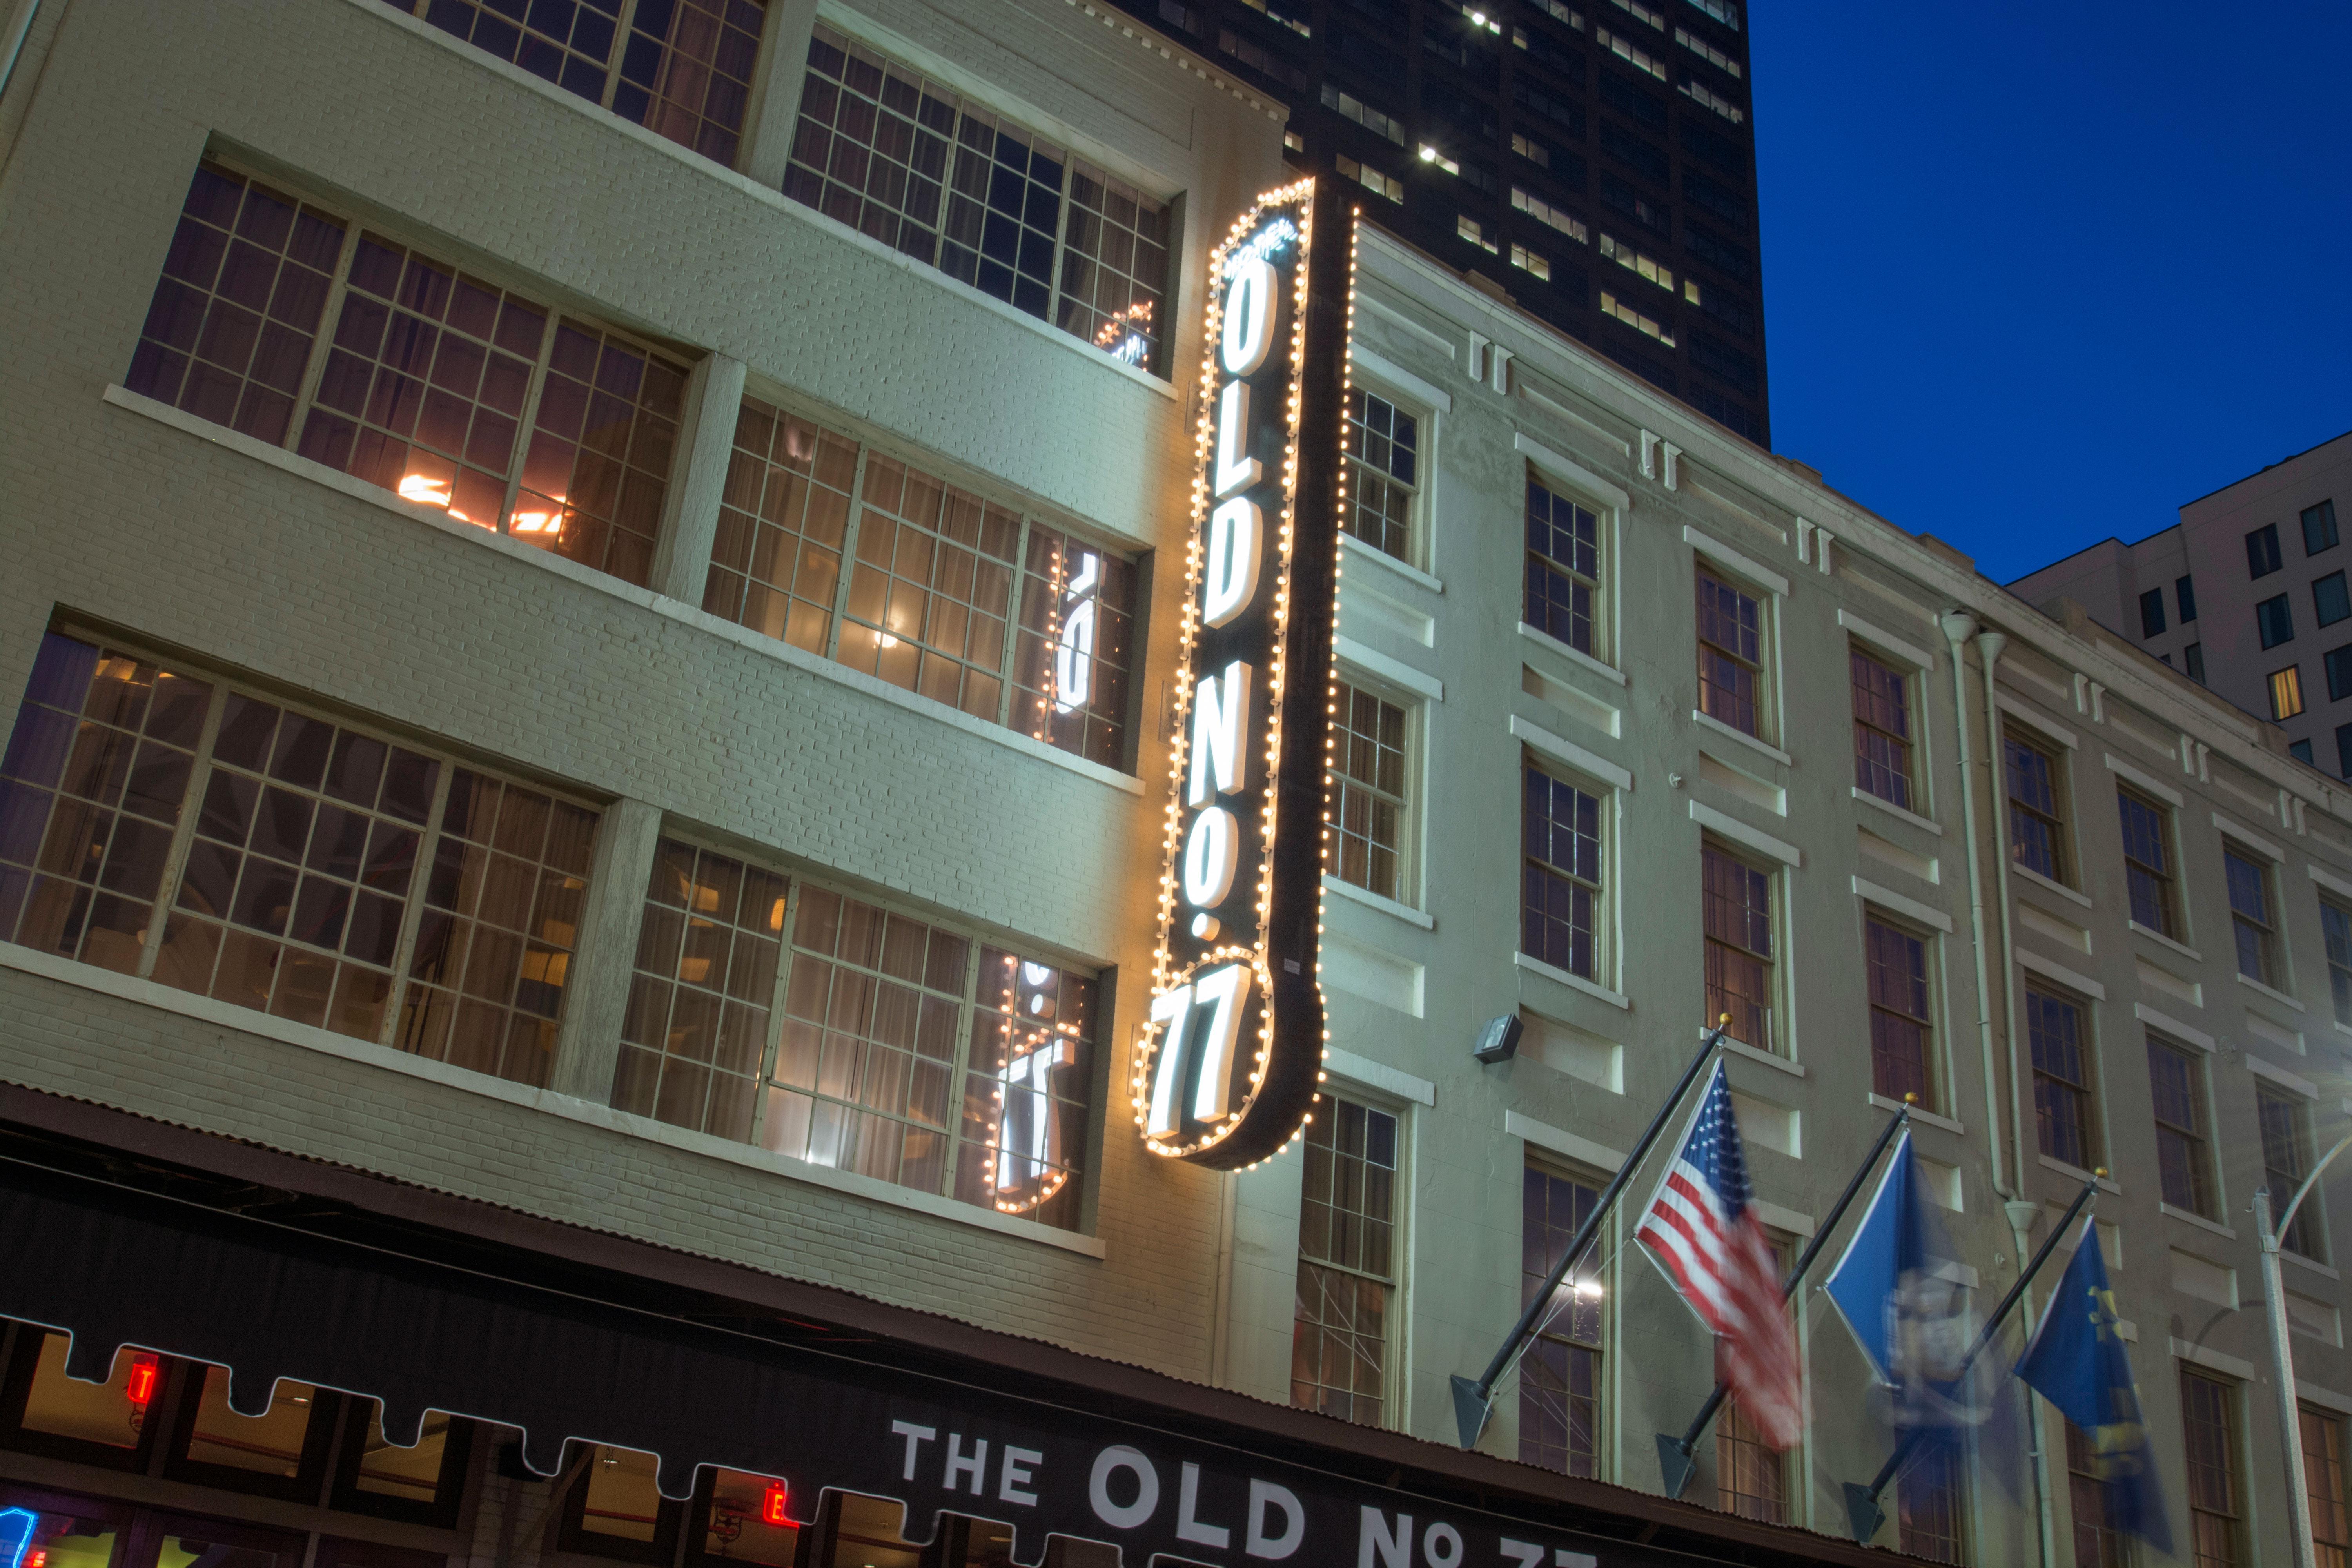 The Old No. 77 Hotel & Chandlery New Orleans Exteriér fotografie